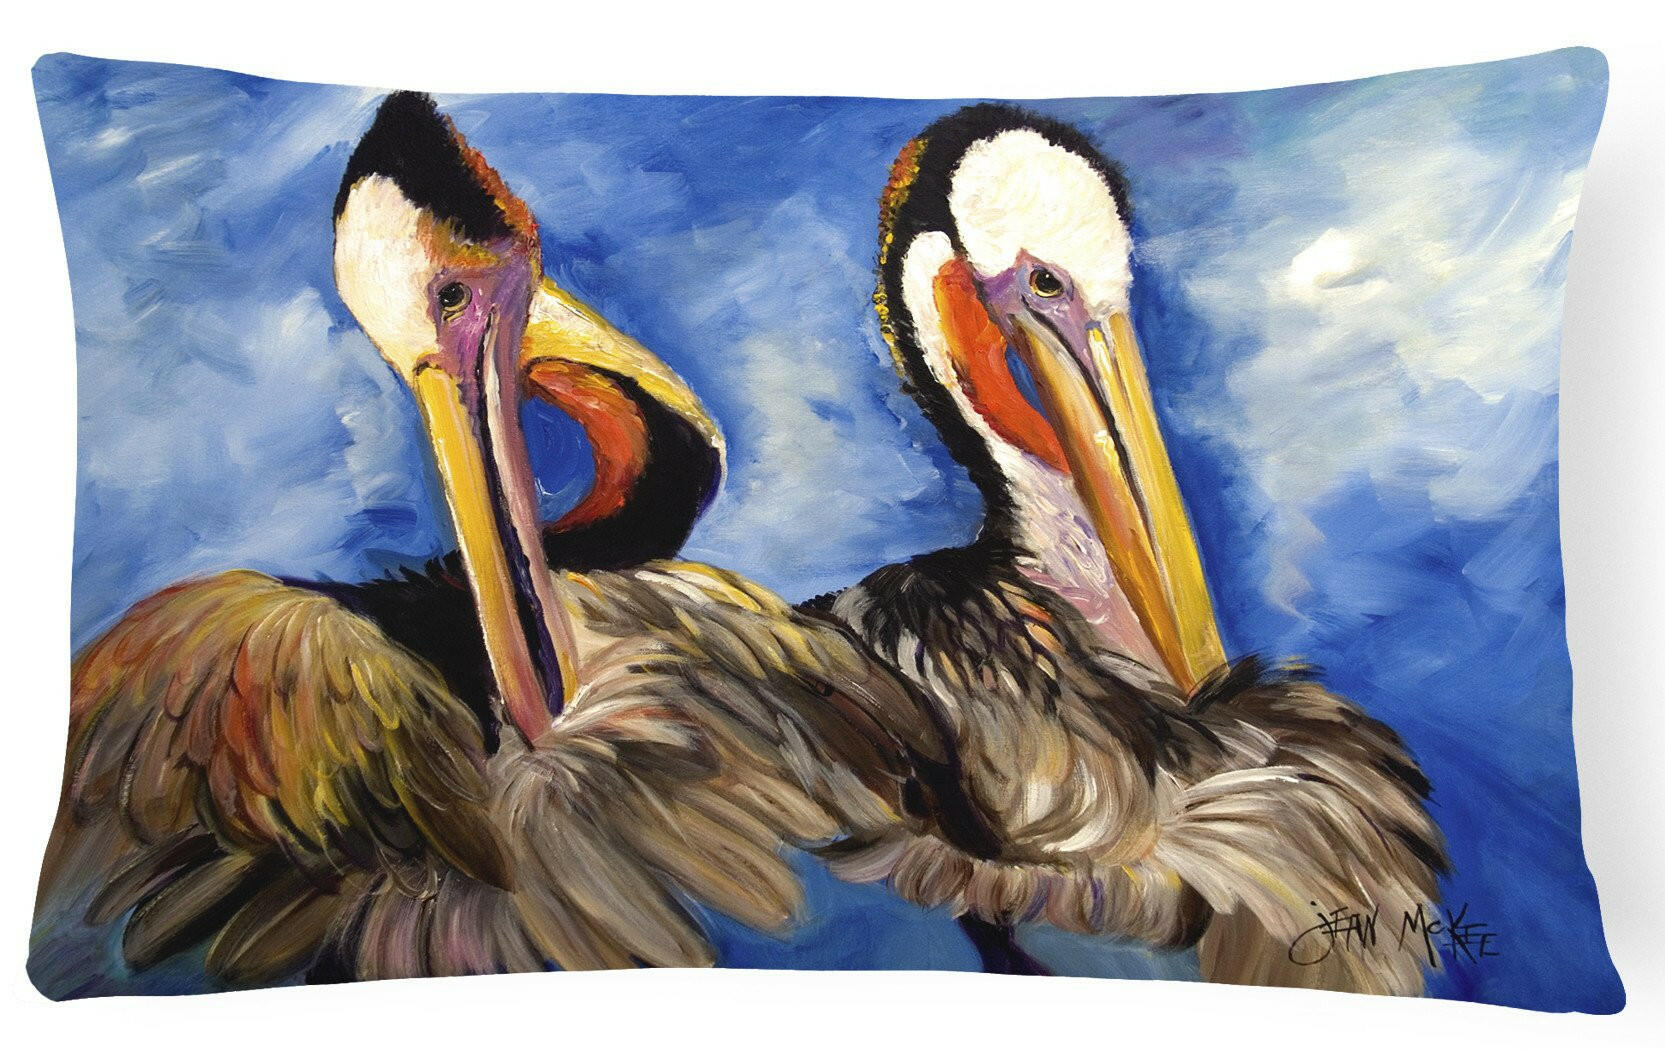 Pelican Brothers Canvas Fabric Decorative Pillow JMK1022PW1216 by Caroline's Treasures